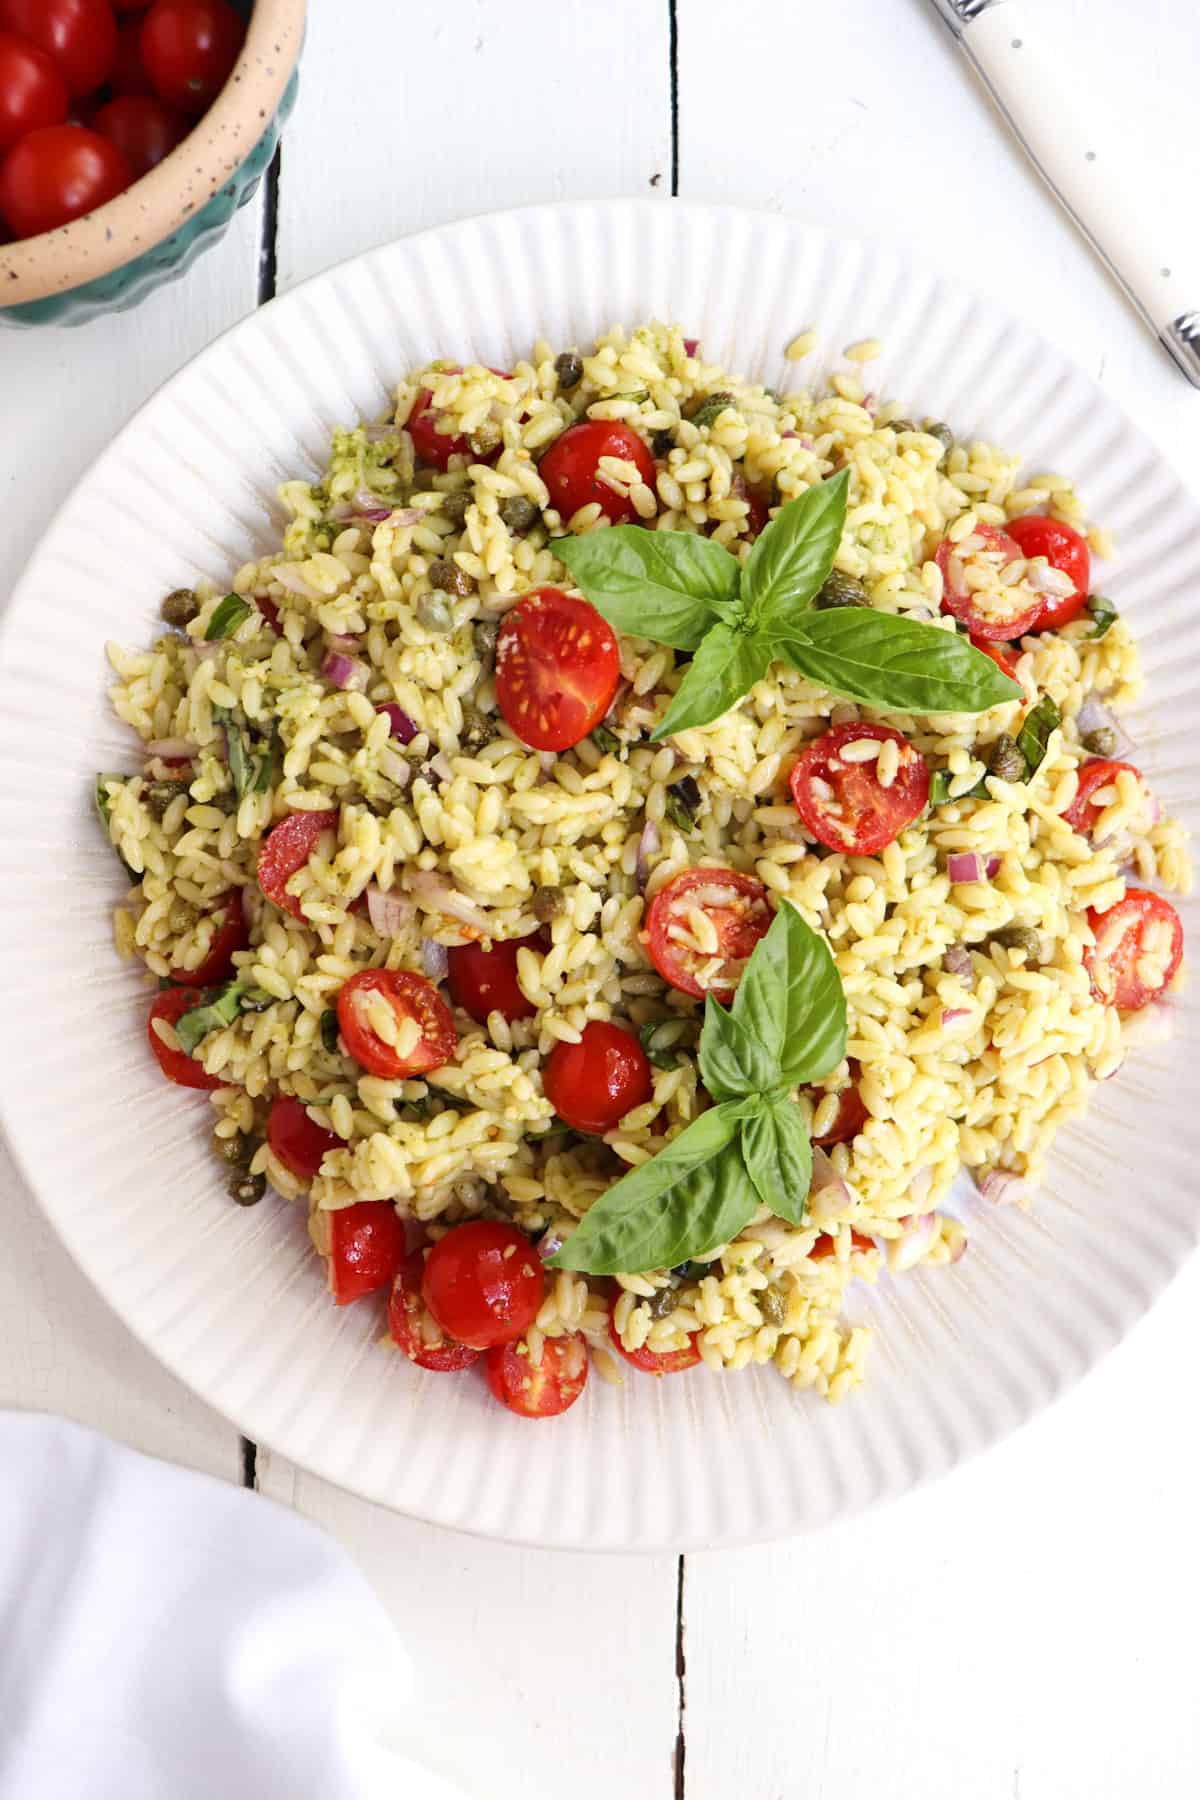 up close of pesto orzo salad garnished with basil leaves.